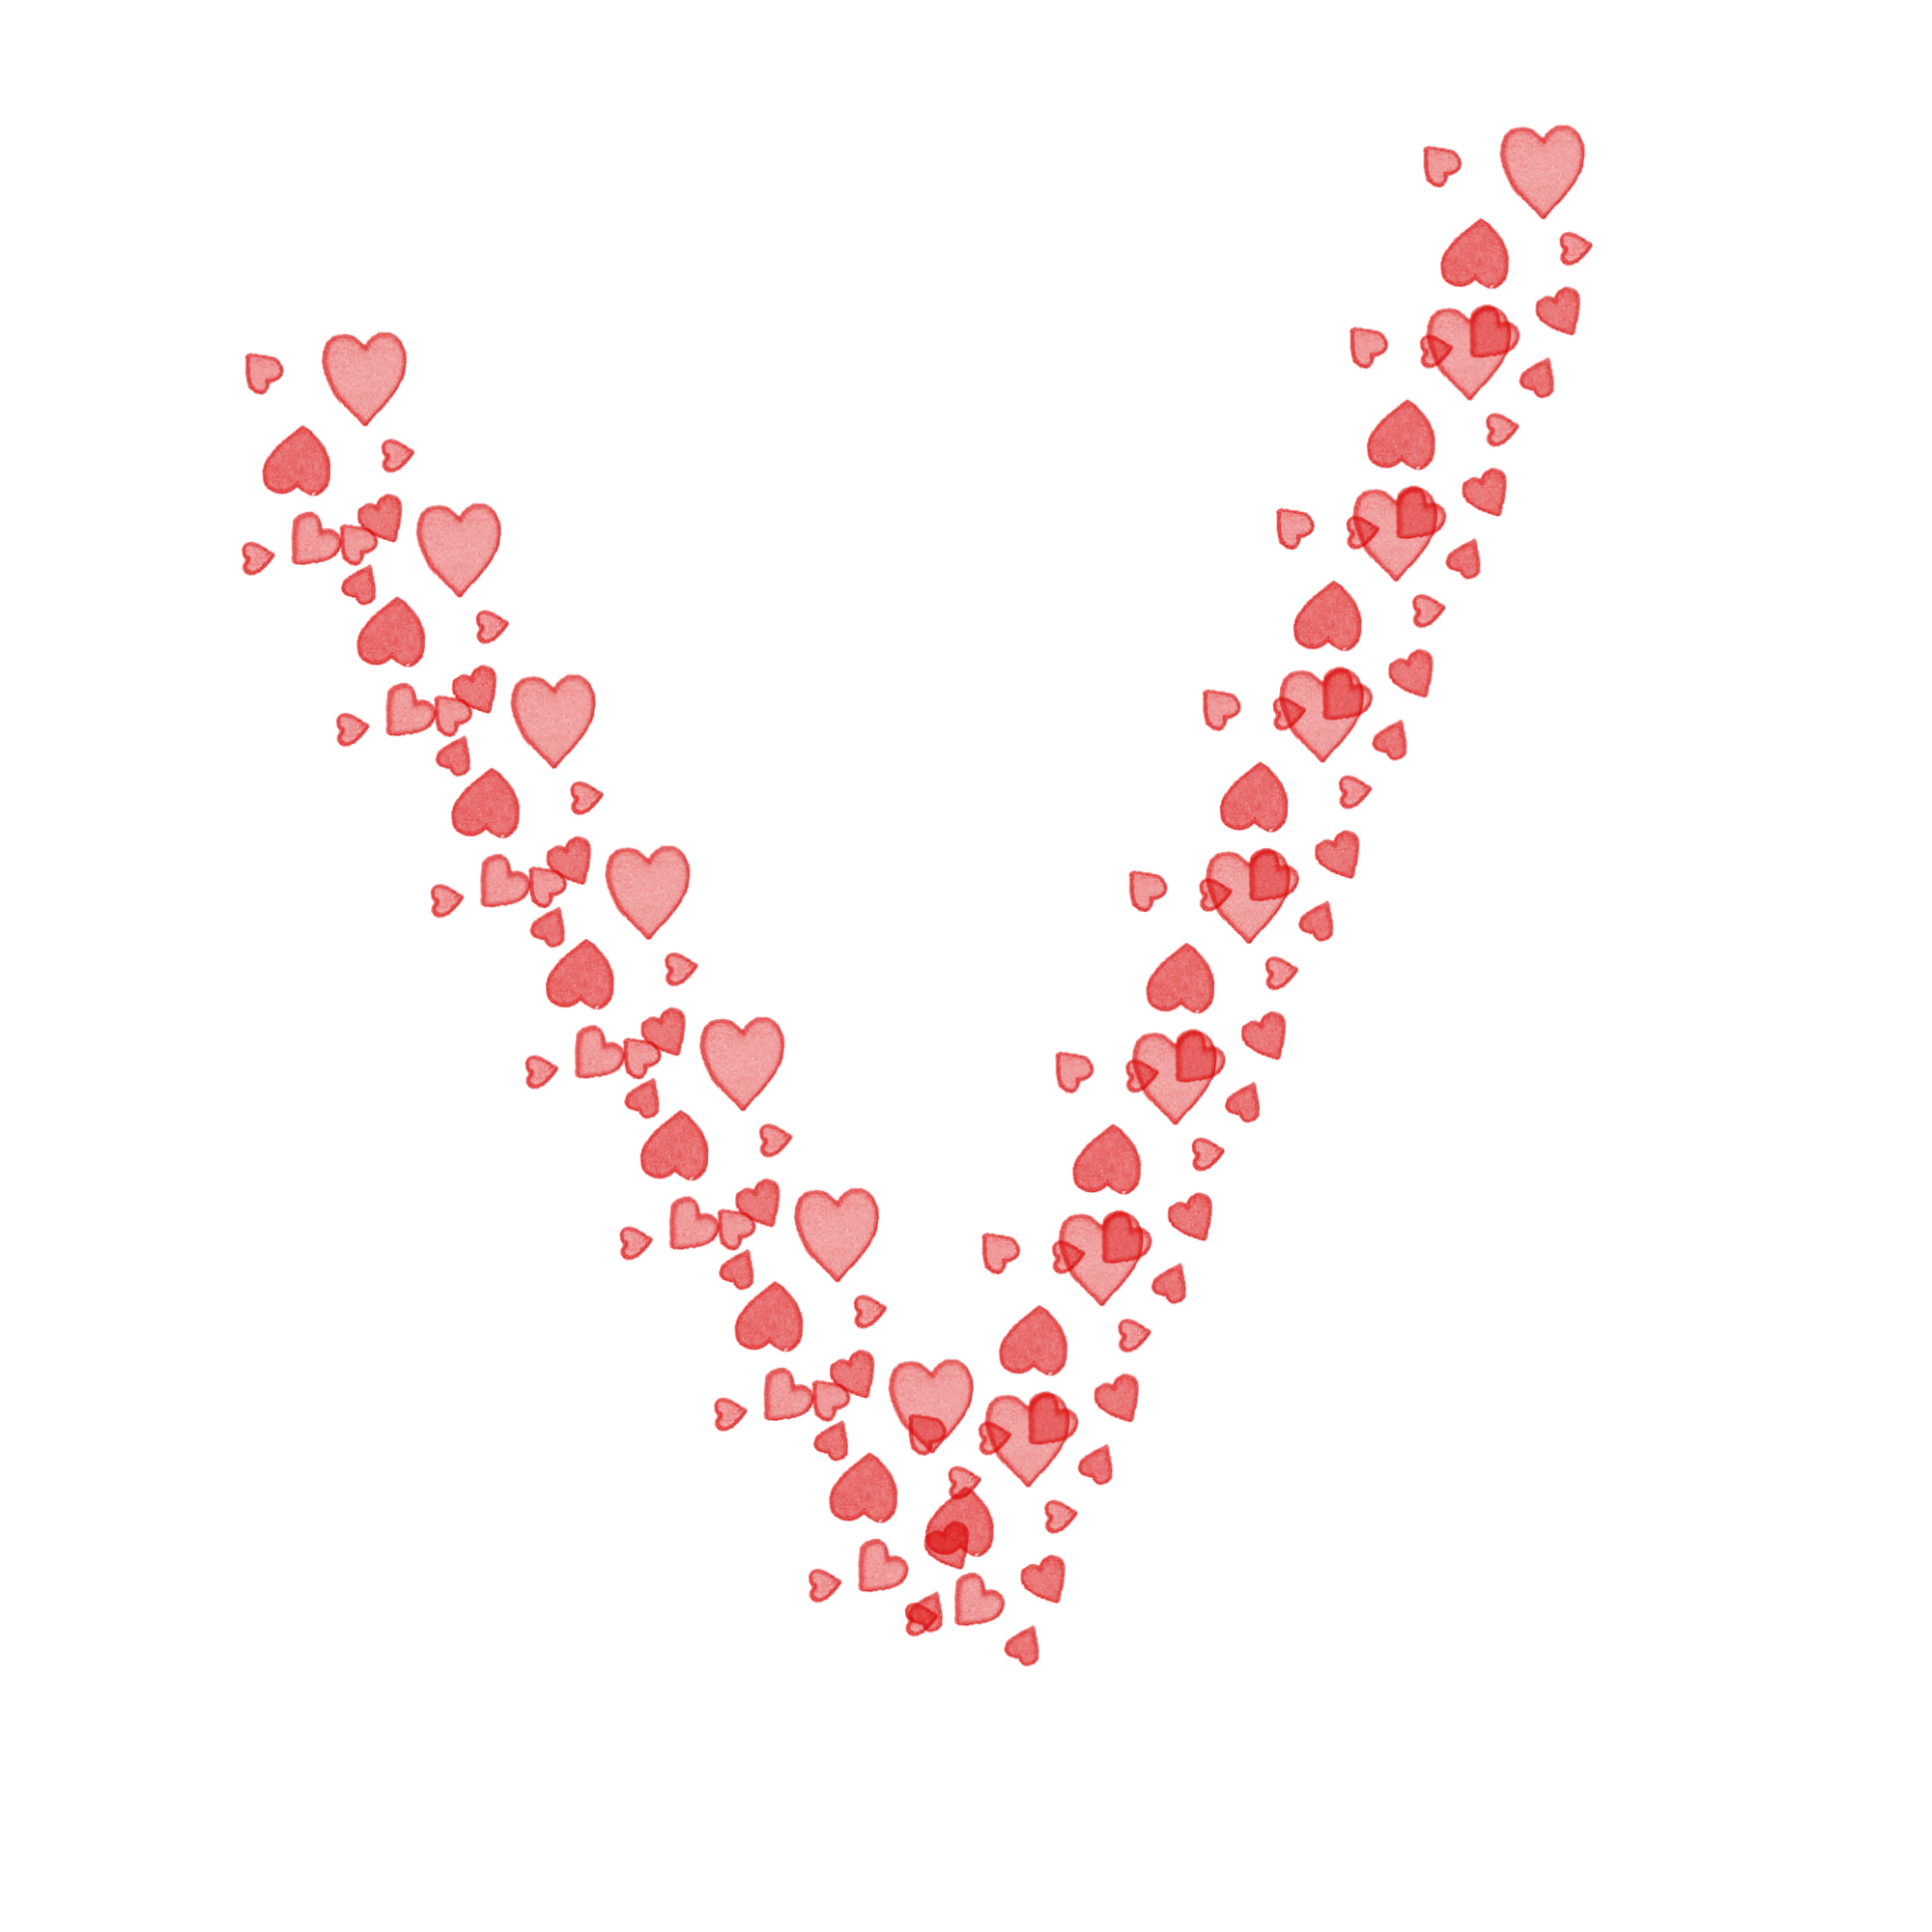 V of hearts pattern free image download